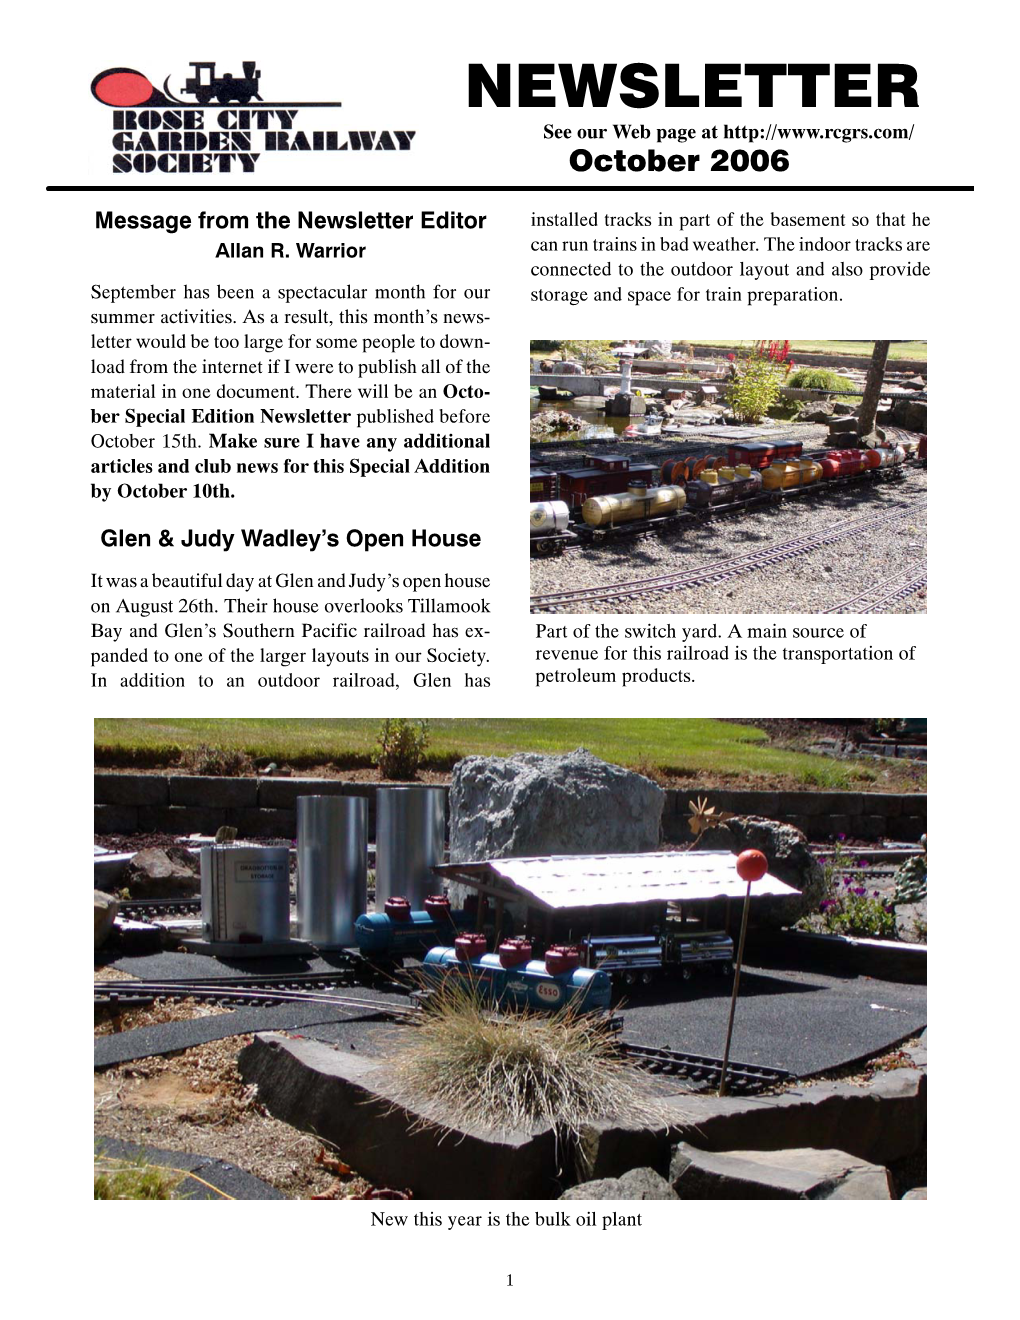 NEWSLETTER See Our Web Page at October 2006